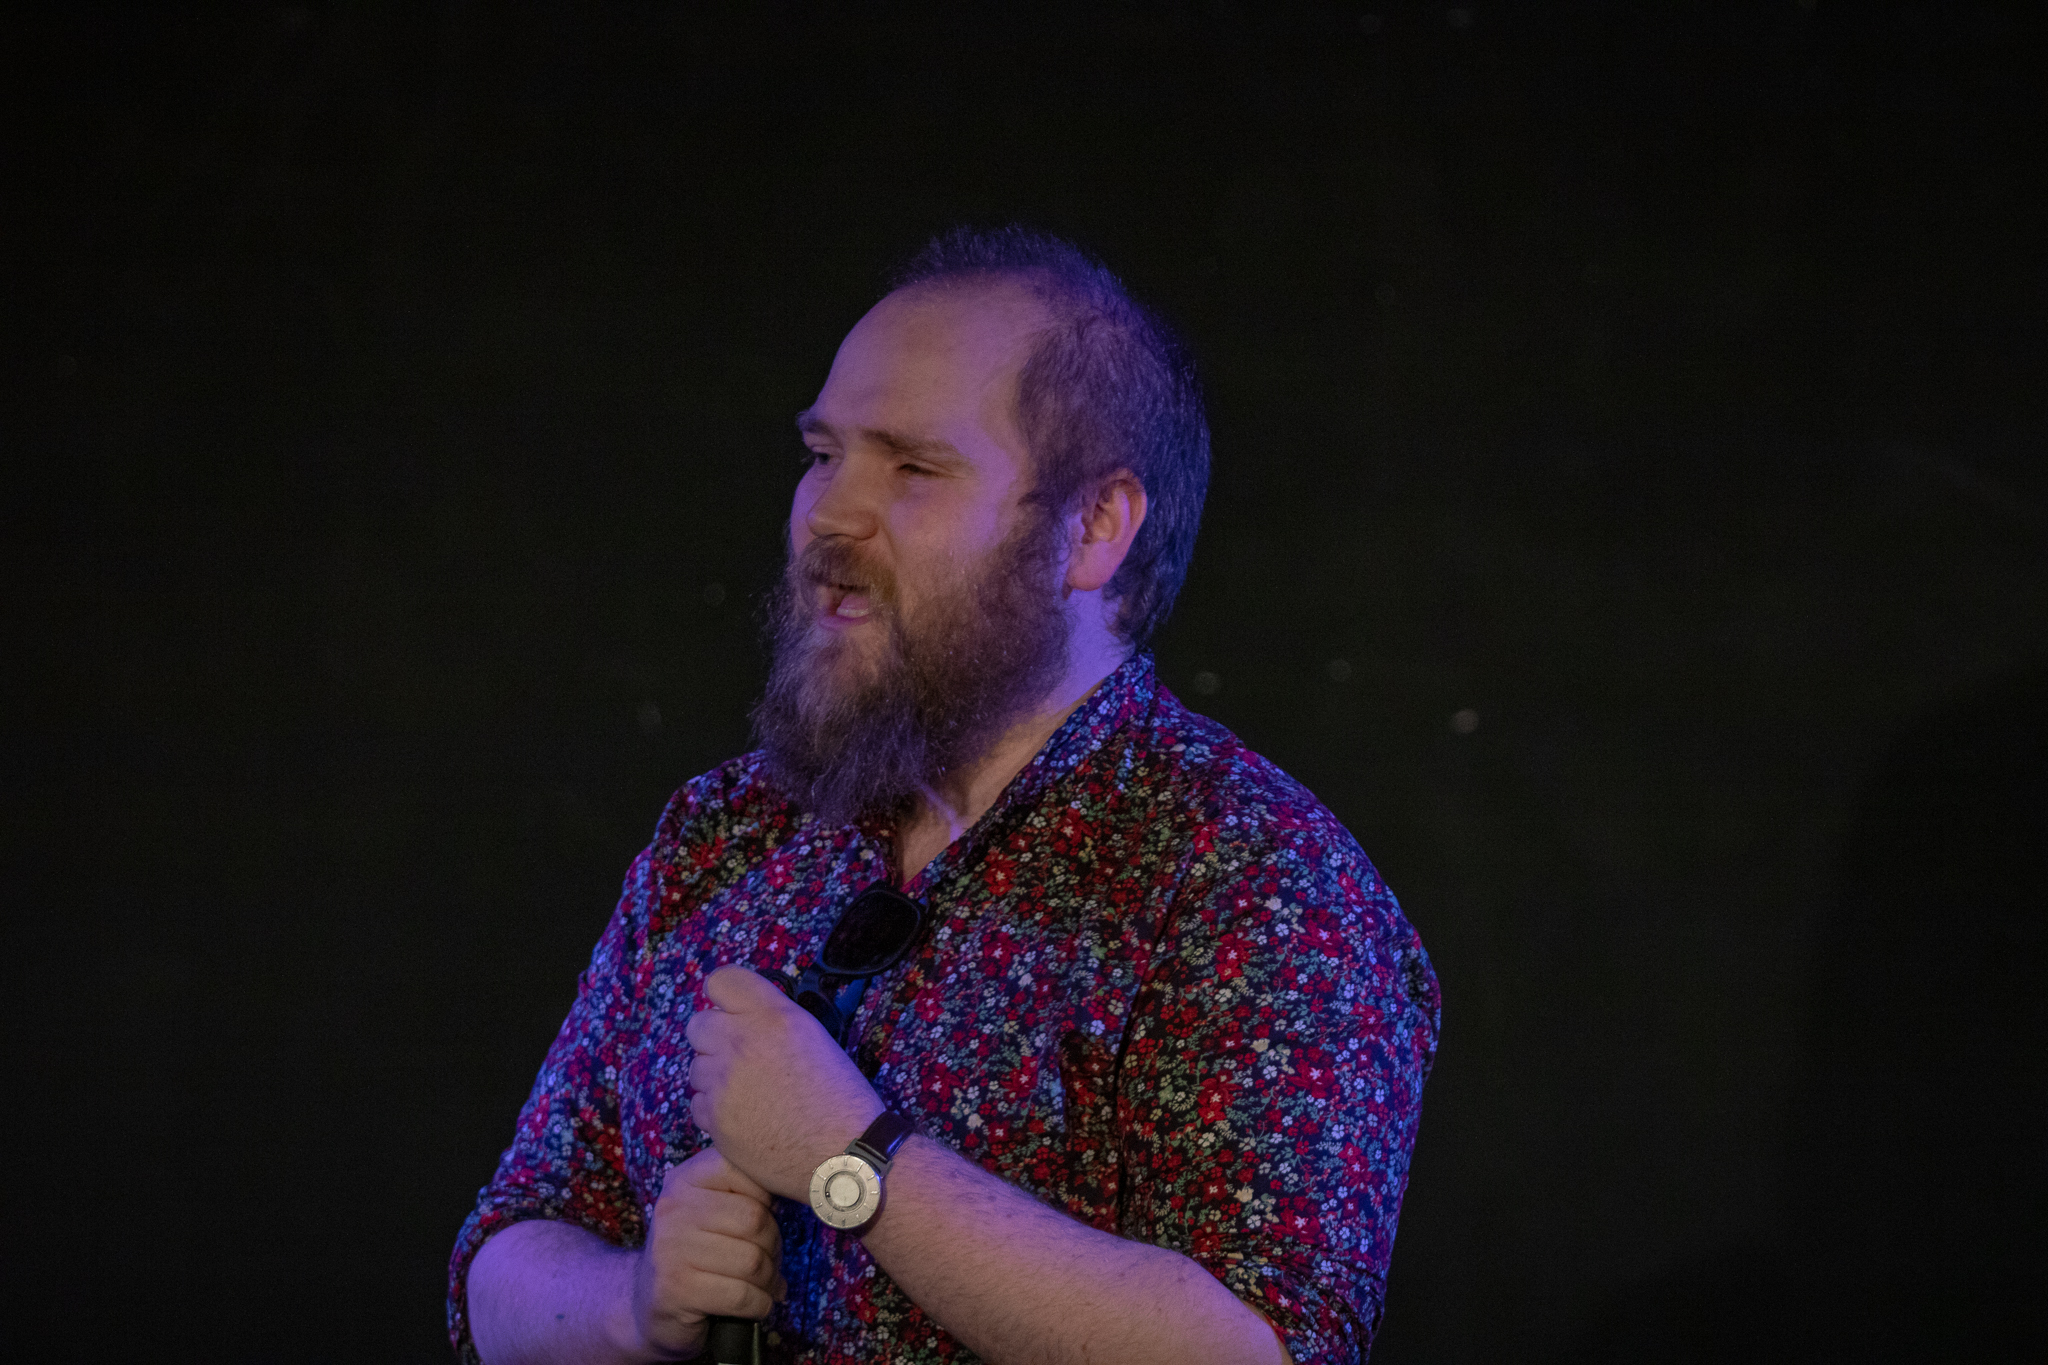 Ben Wilson, a white man, with short blonde hair and a beard. He wears a floral shirt and is talking mid-sentence.